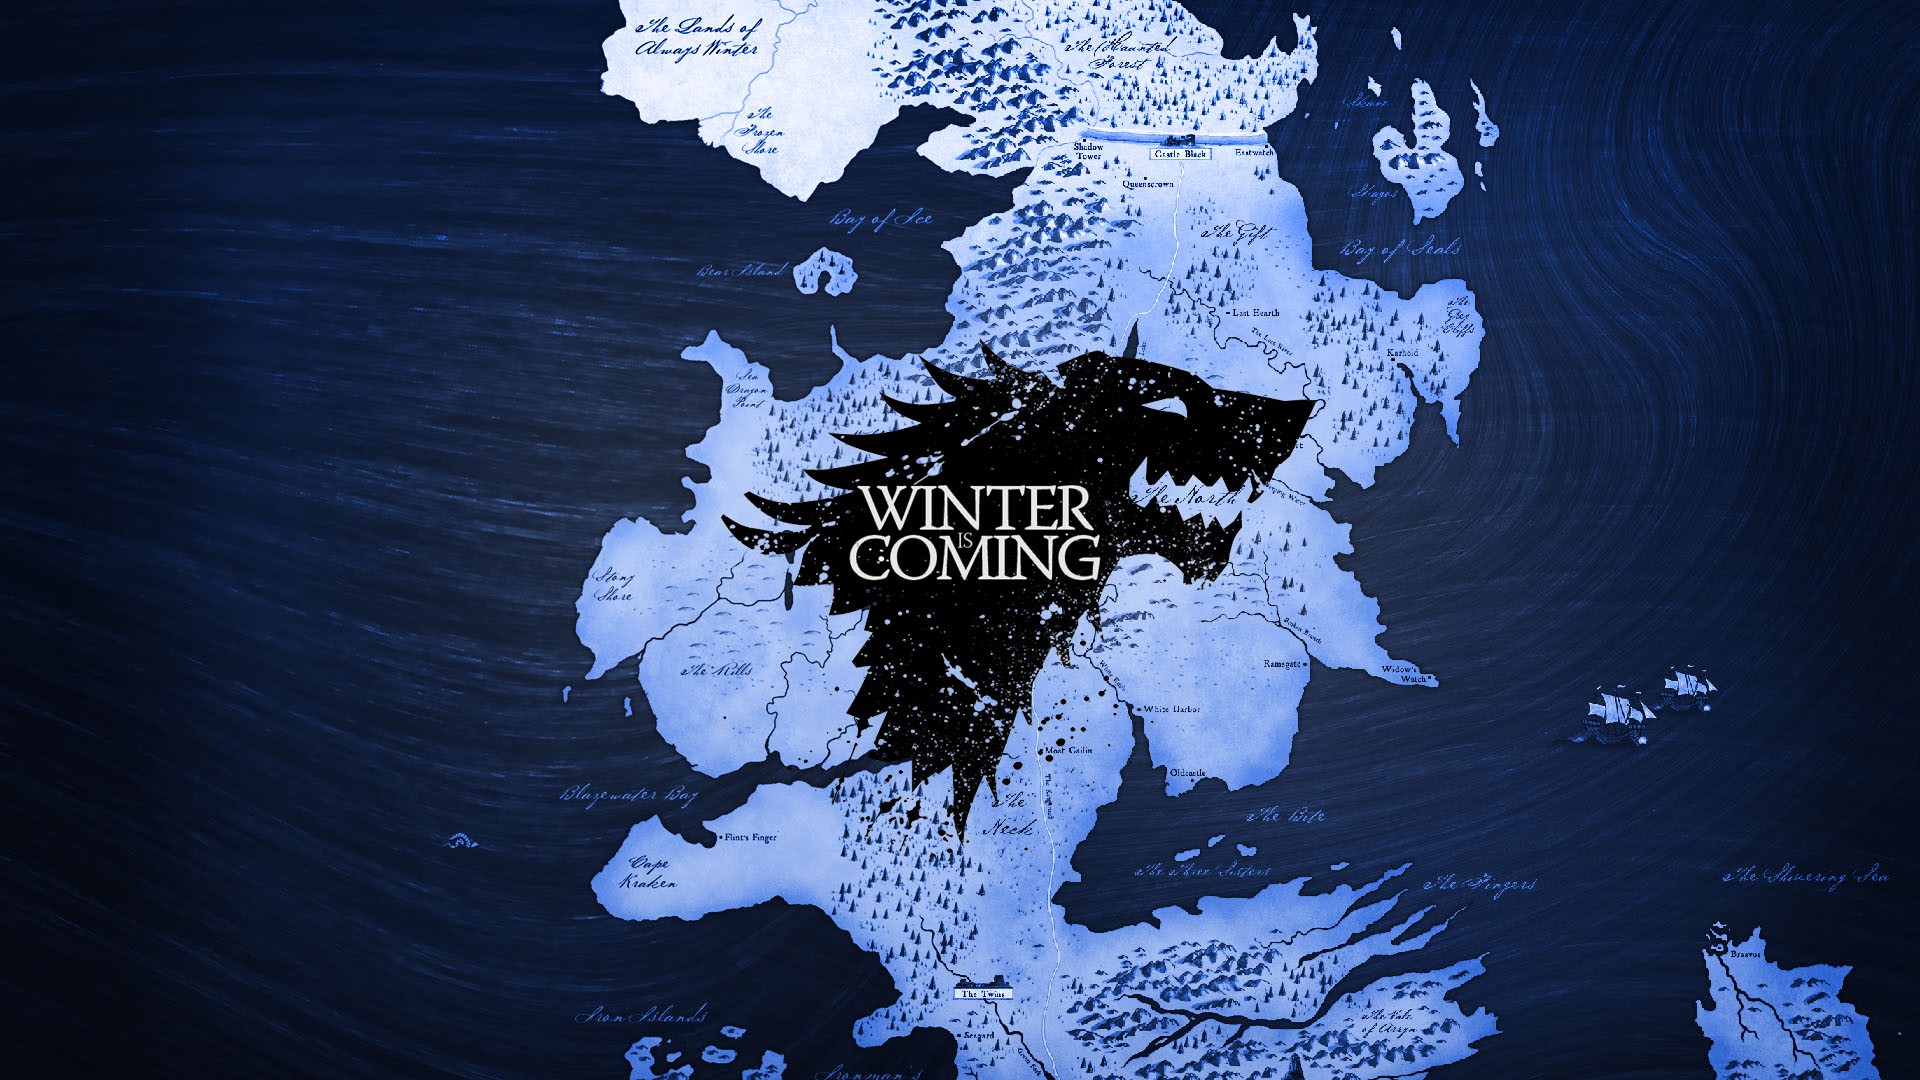 Game Of Thrones, Winter Is Coming Wallpaper